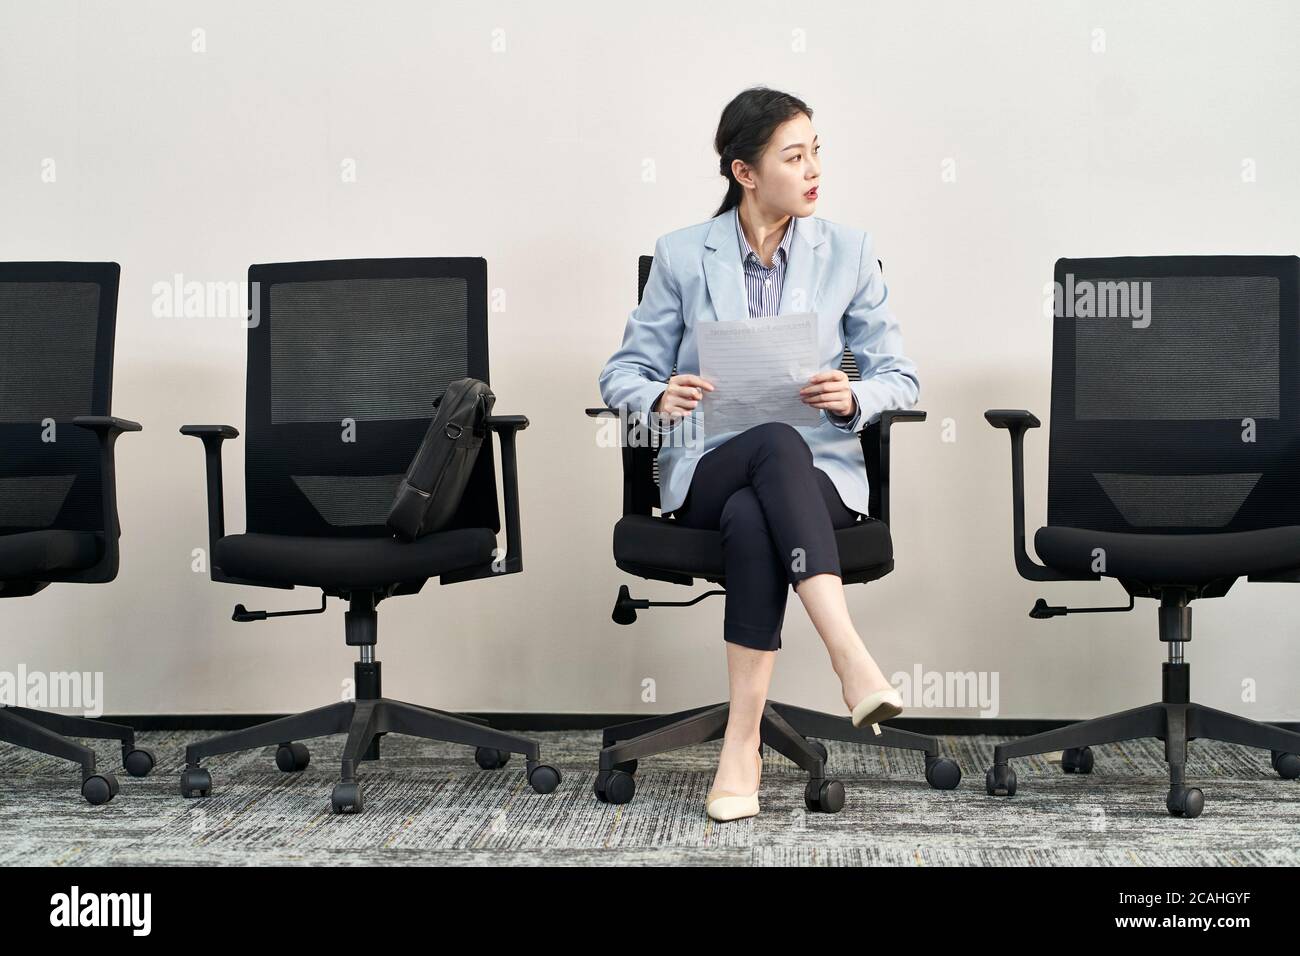 young asian female job seeker sitting in chair anxiously waiting for interview Stock Photo